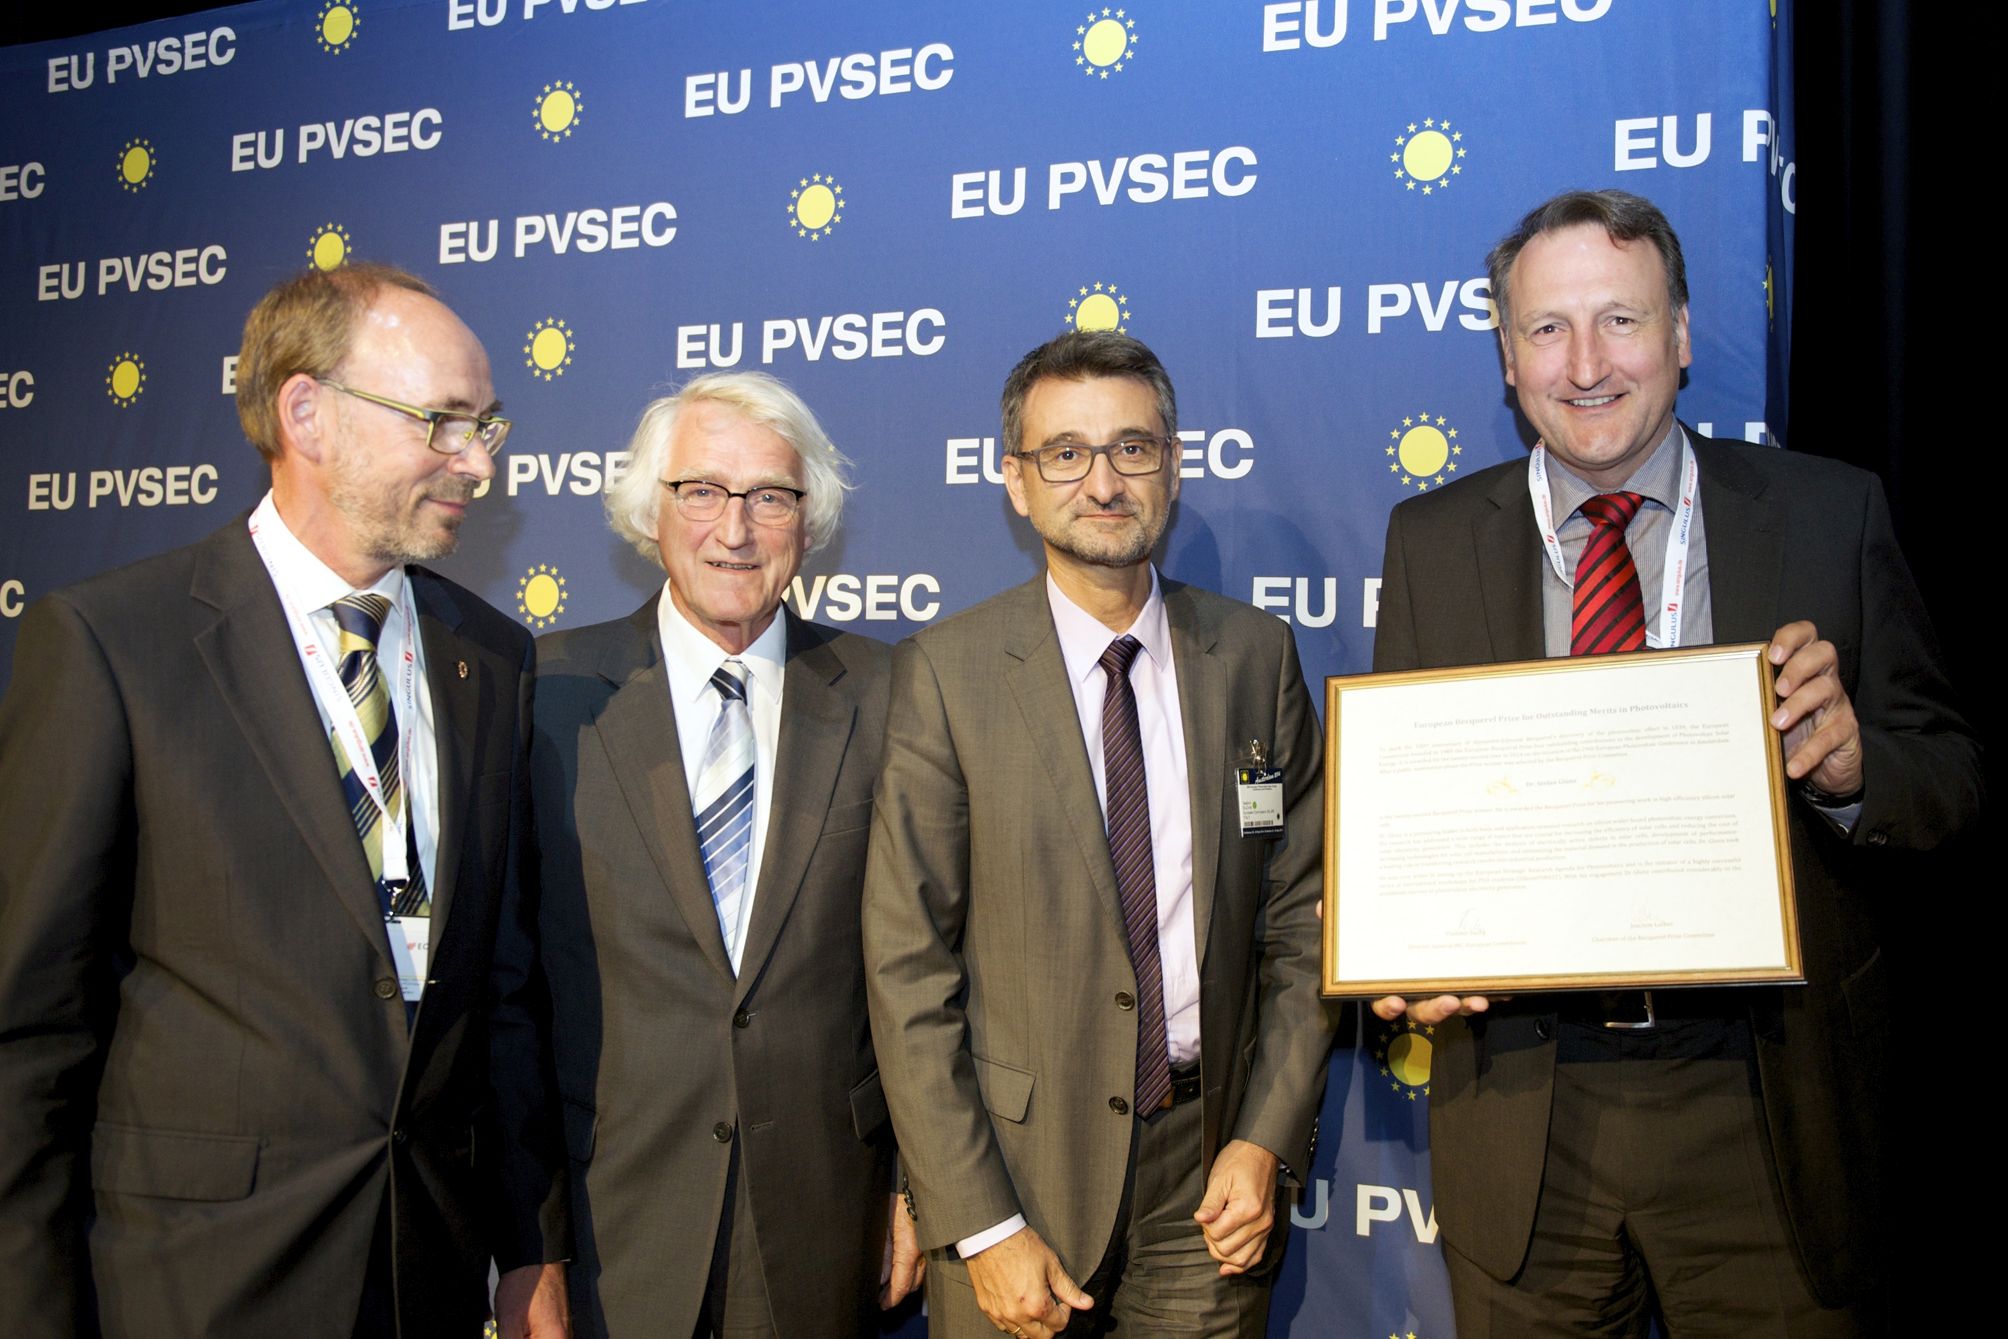 from left to right: Prof. Wim Sinke, Program Development Manager, ECN Solar Energy, Prof. Joachim Luther, Chairman of the Becquerel Prize committee Vladimir Sucha, Director-General JRC, European Commission, Dr. Stefan Glunz, Recipient of the Becquerel Prize 2014.